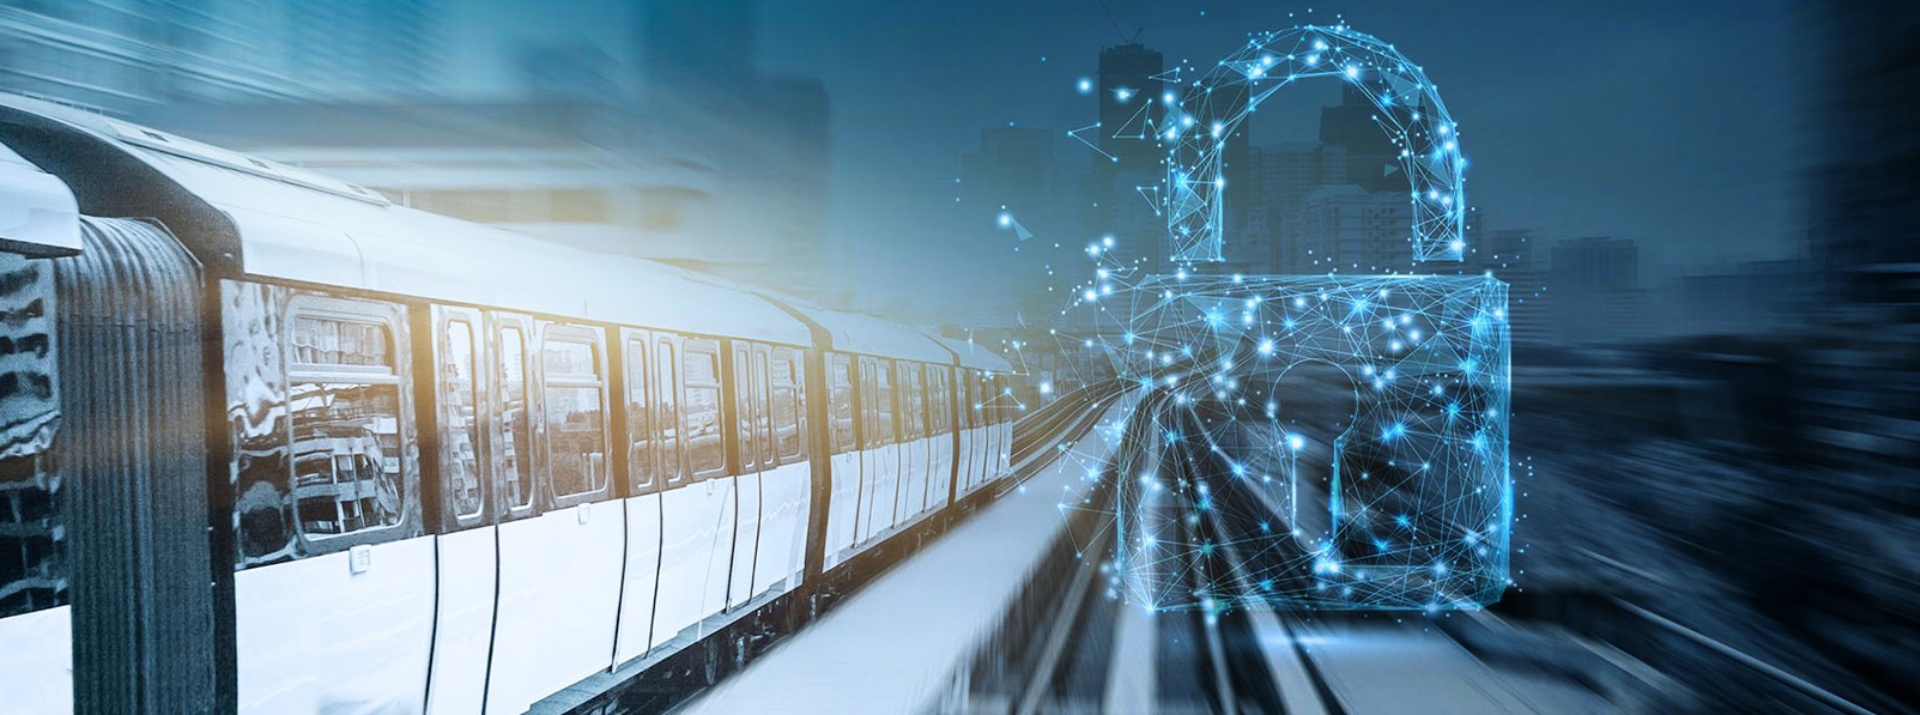 Cybersecurity in rail transport: digital protection against real-life threats | Knorr-Bremse Group